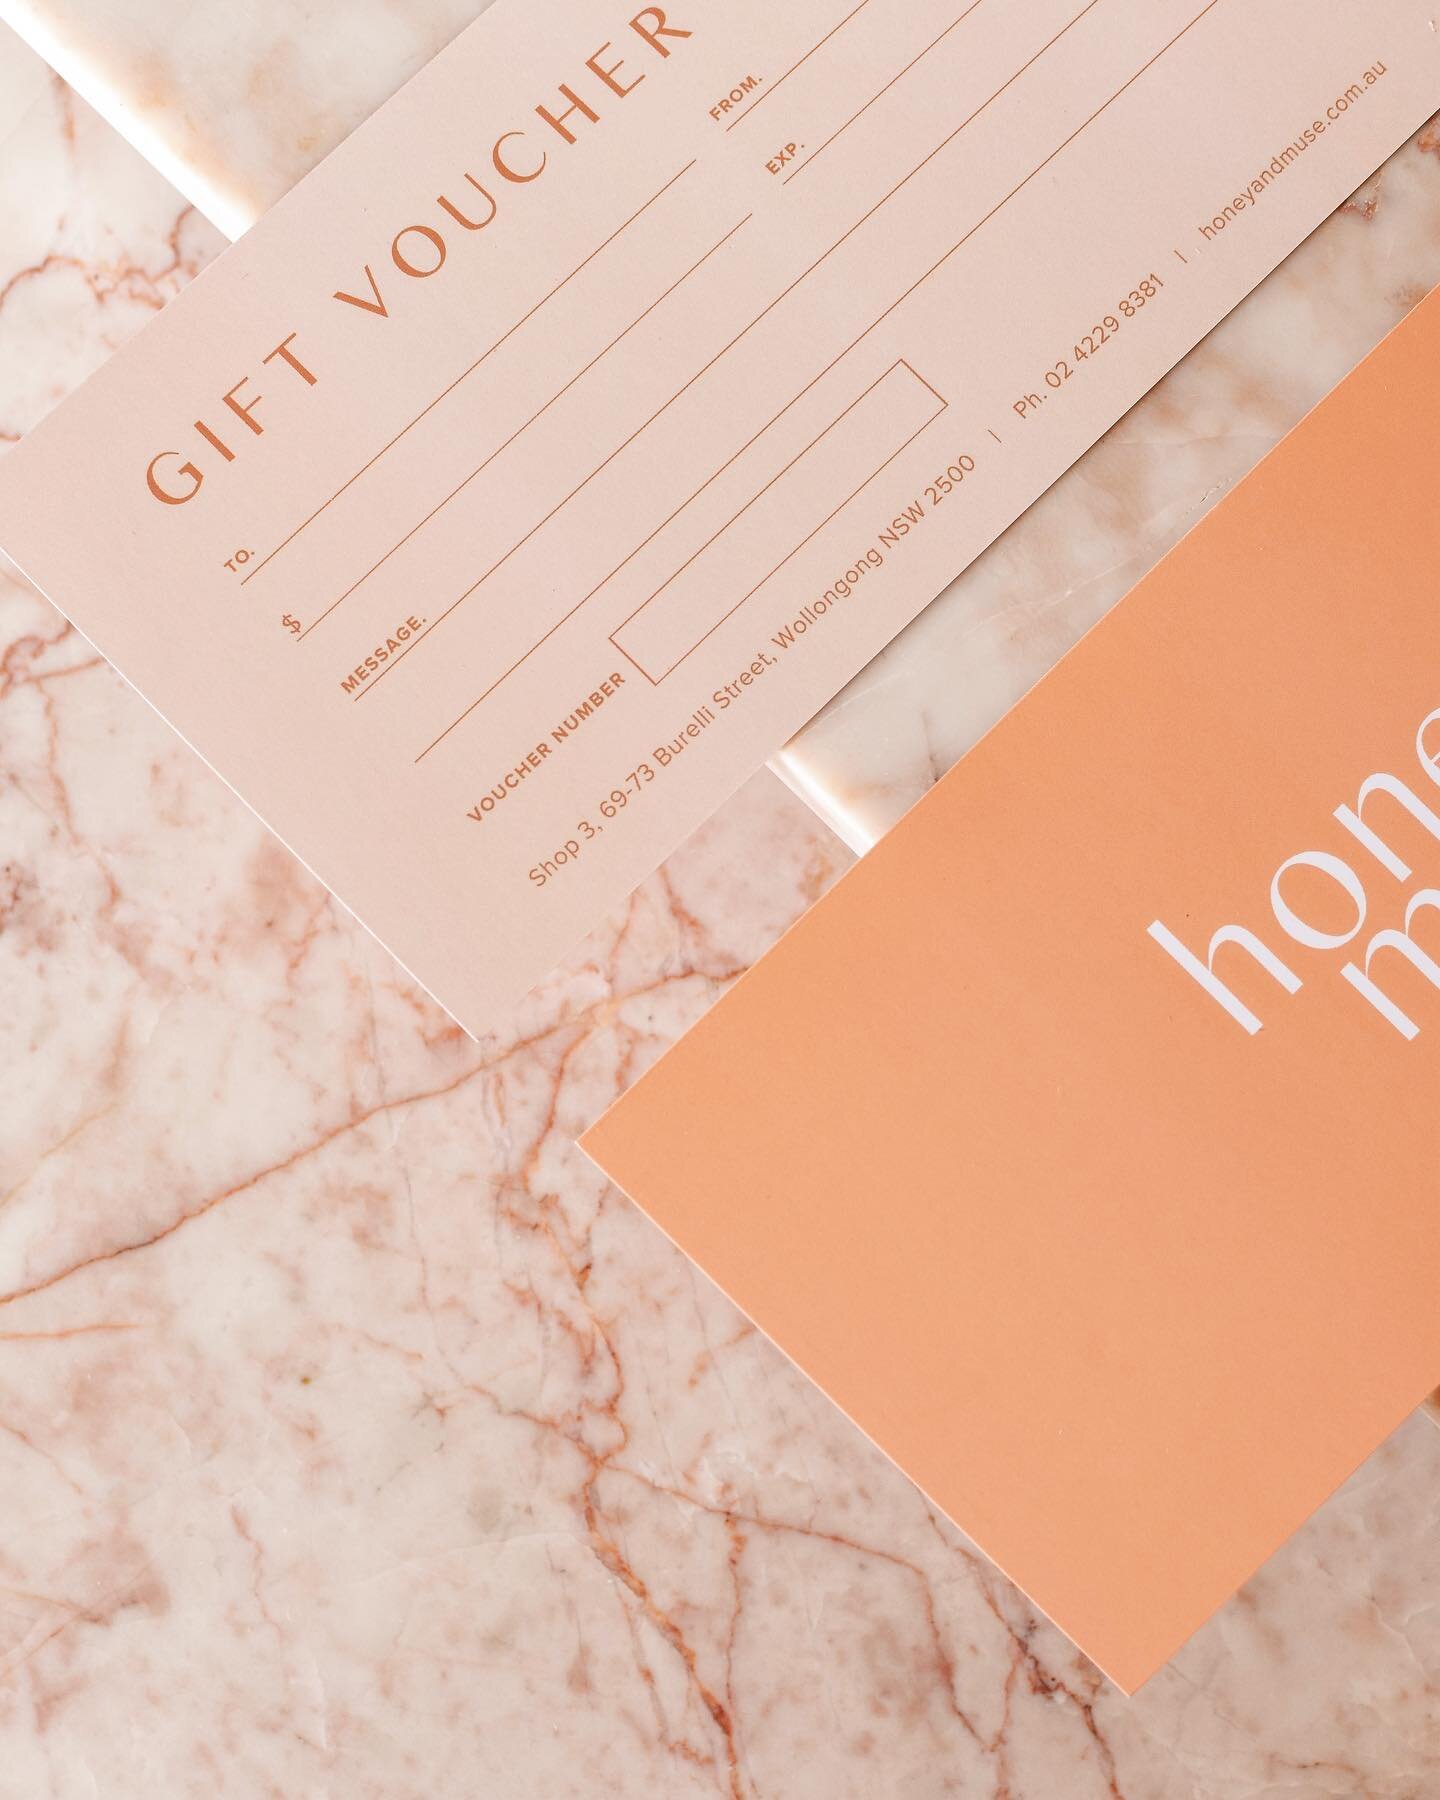 Gift Vouchers always available in store or online. 
Perfect gift for Mothers Day coming up ! 🥰
.
.
.
.
.
#wollongonghair #wollongongbusiness #hairsouthcoast #giftvouchersonline #honeynmusehair